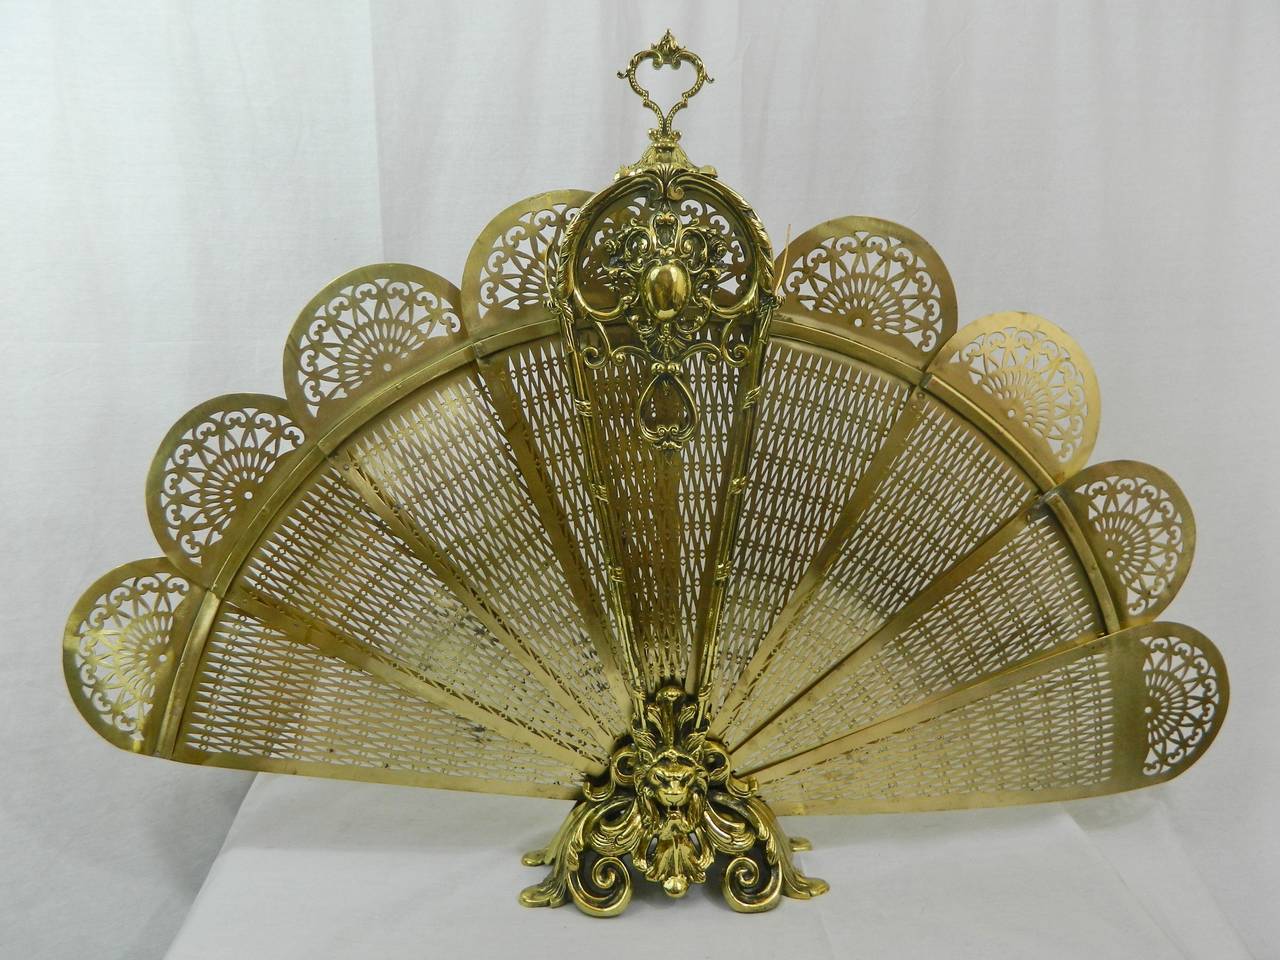 French Brass Fan Fireplace Screen, 19th Century
Professionally cleaned and polished